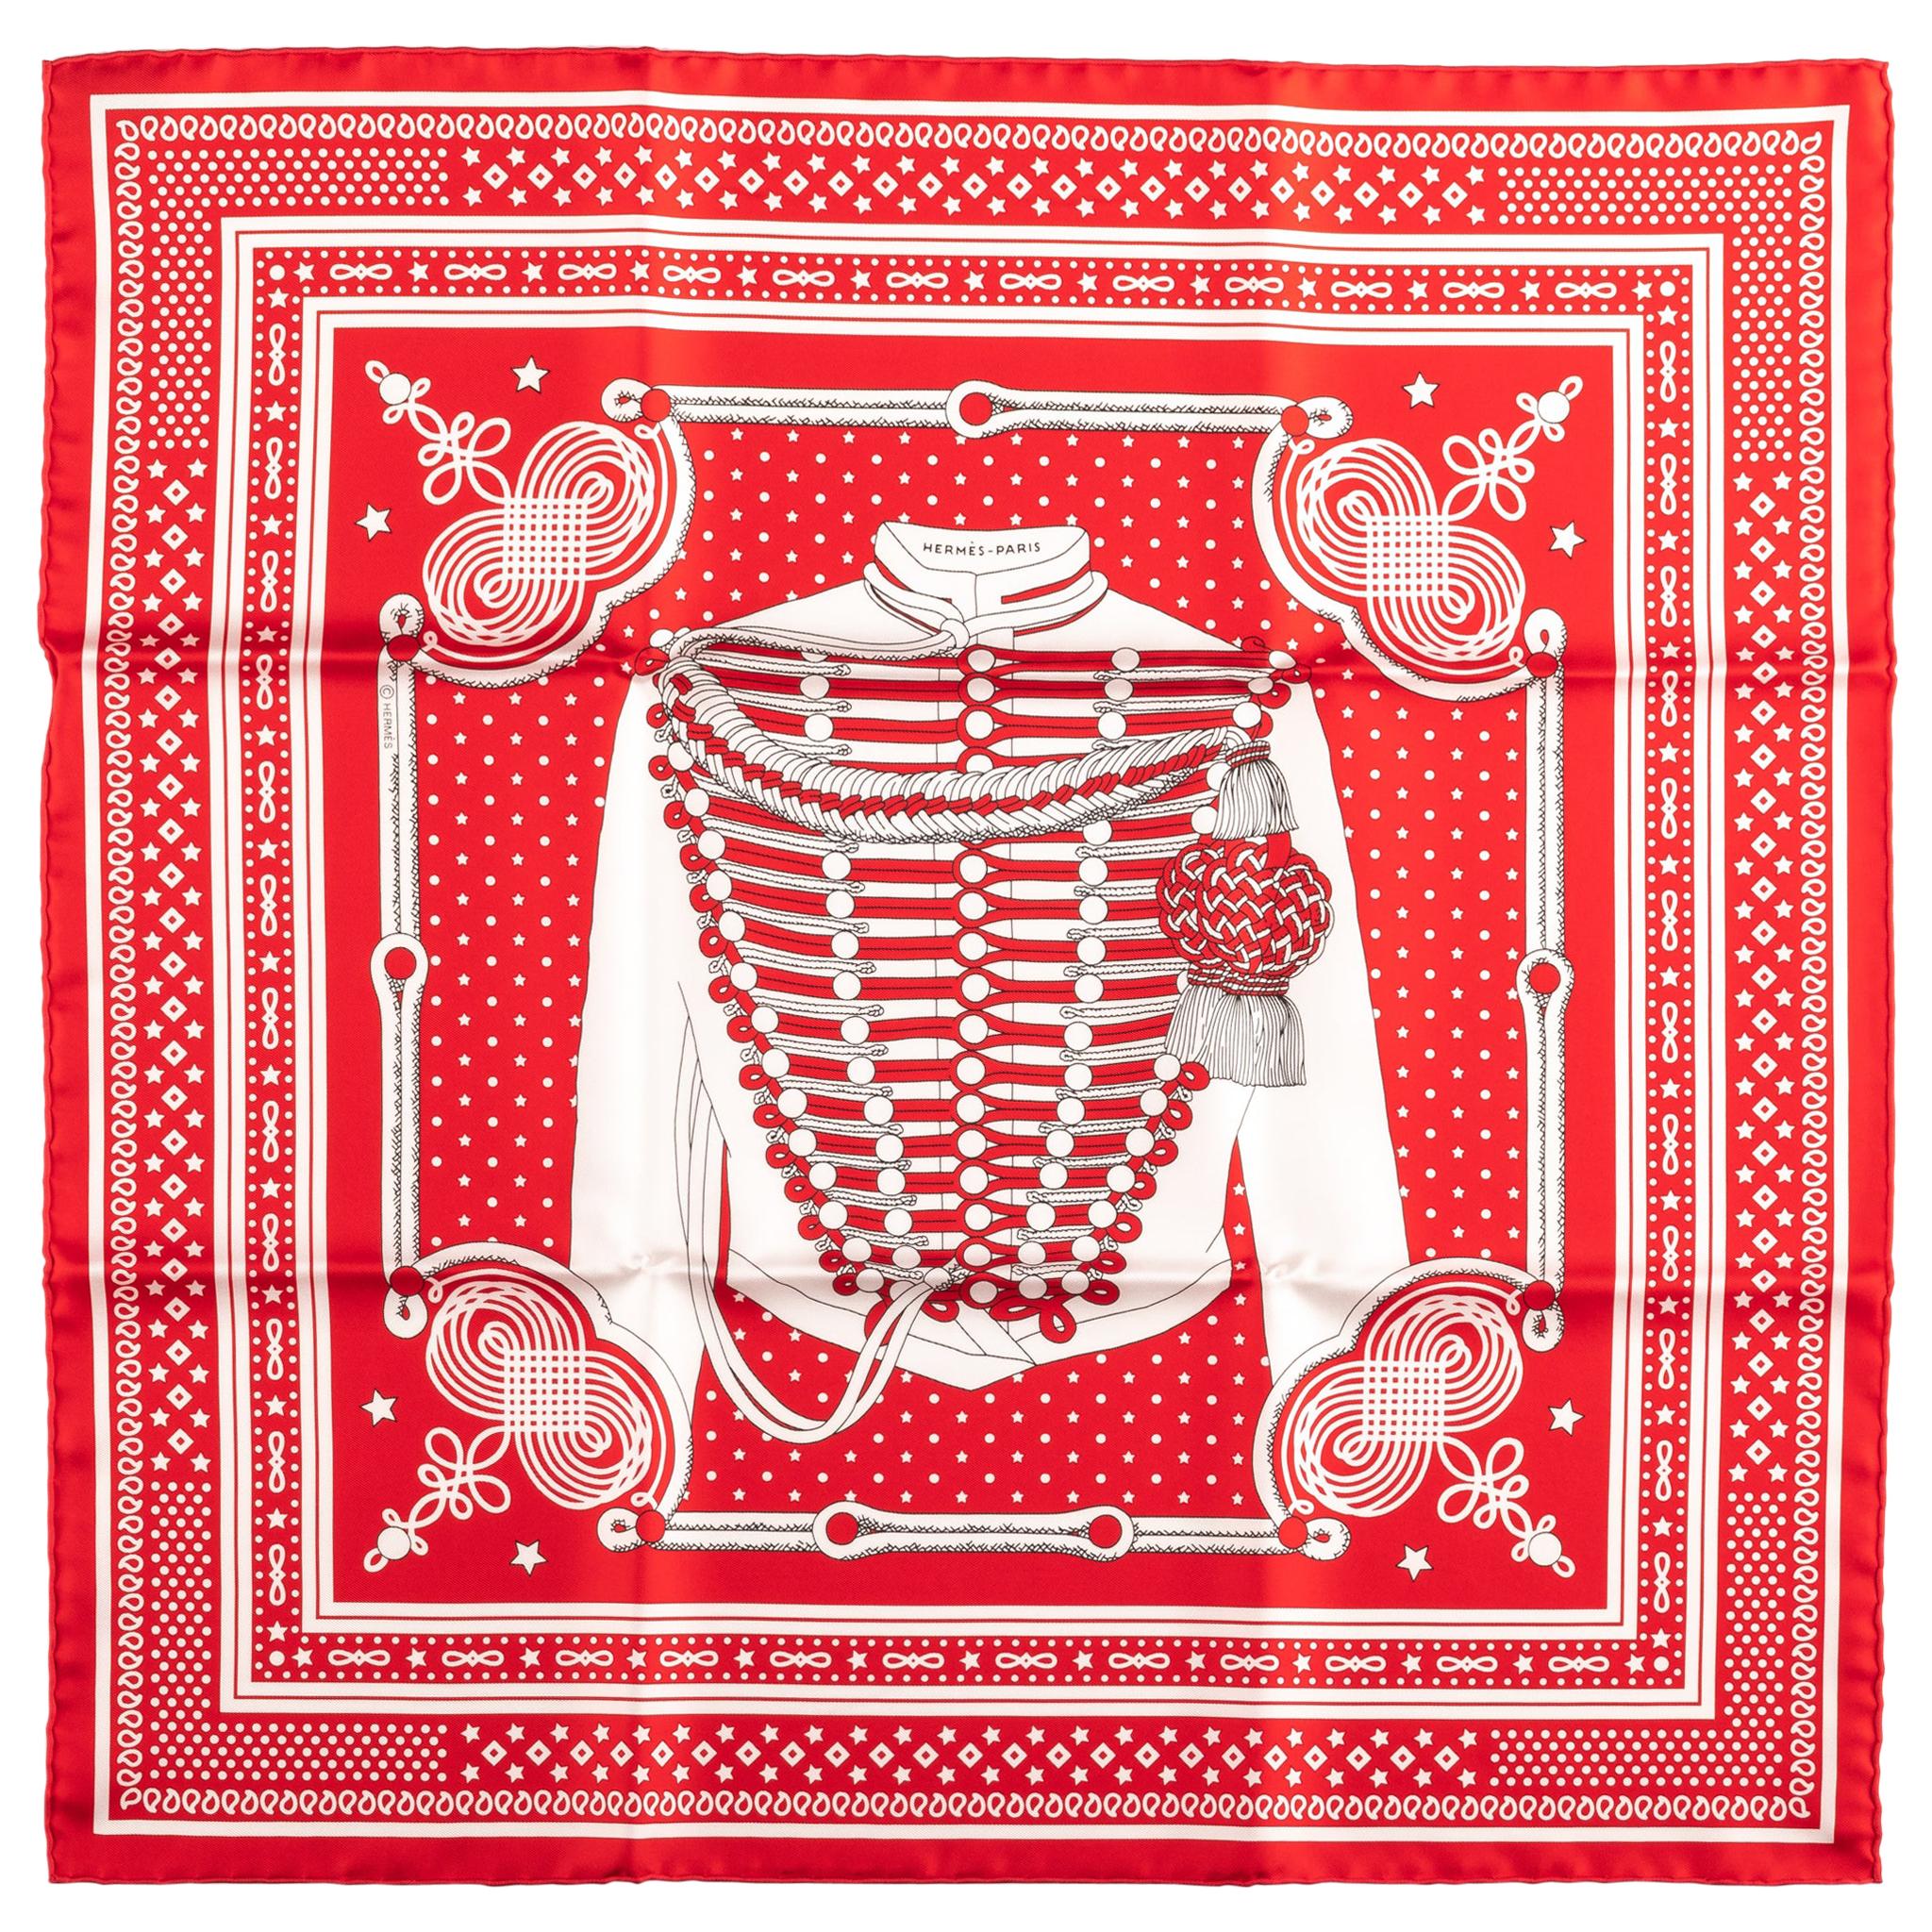 New Hermes Limited Edition Red Bandana Brandebourg Scarf